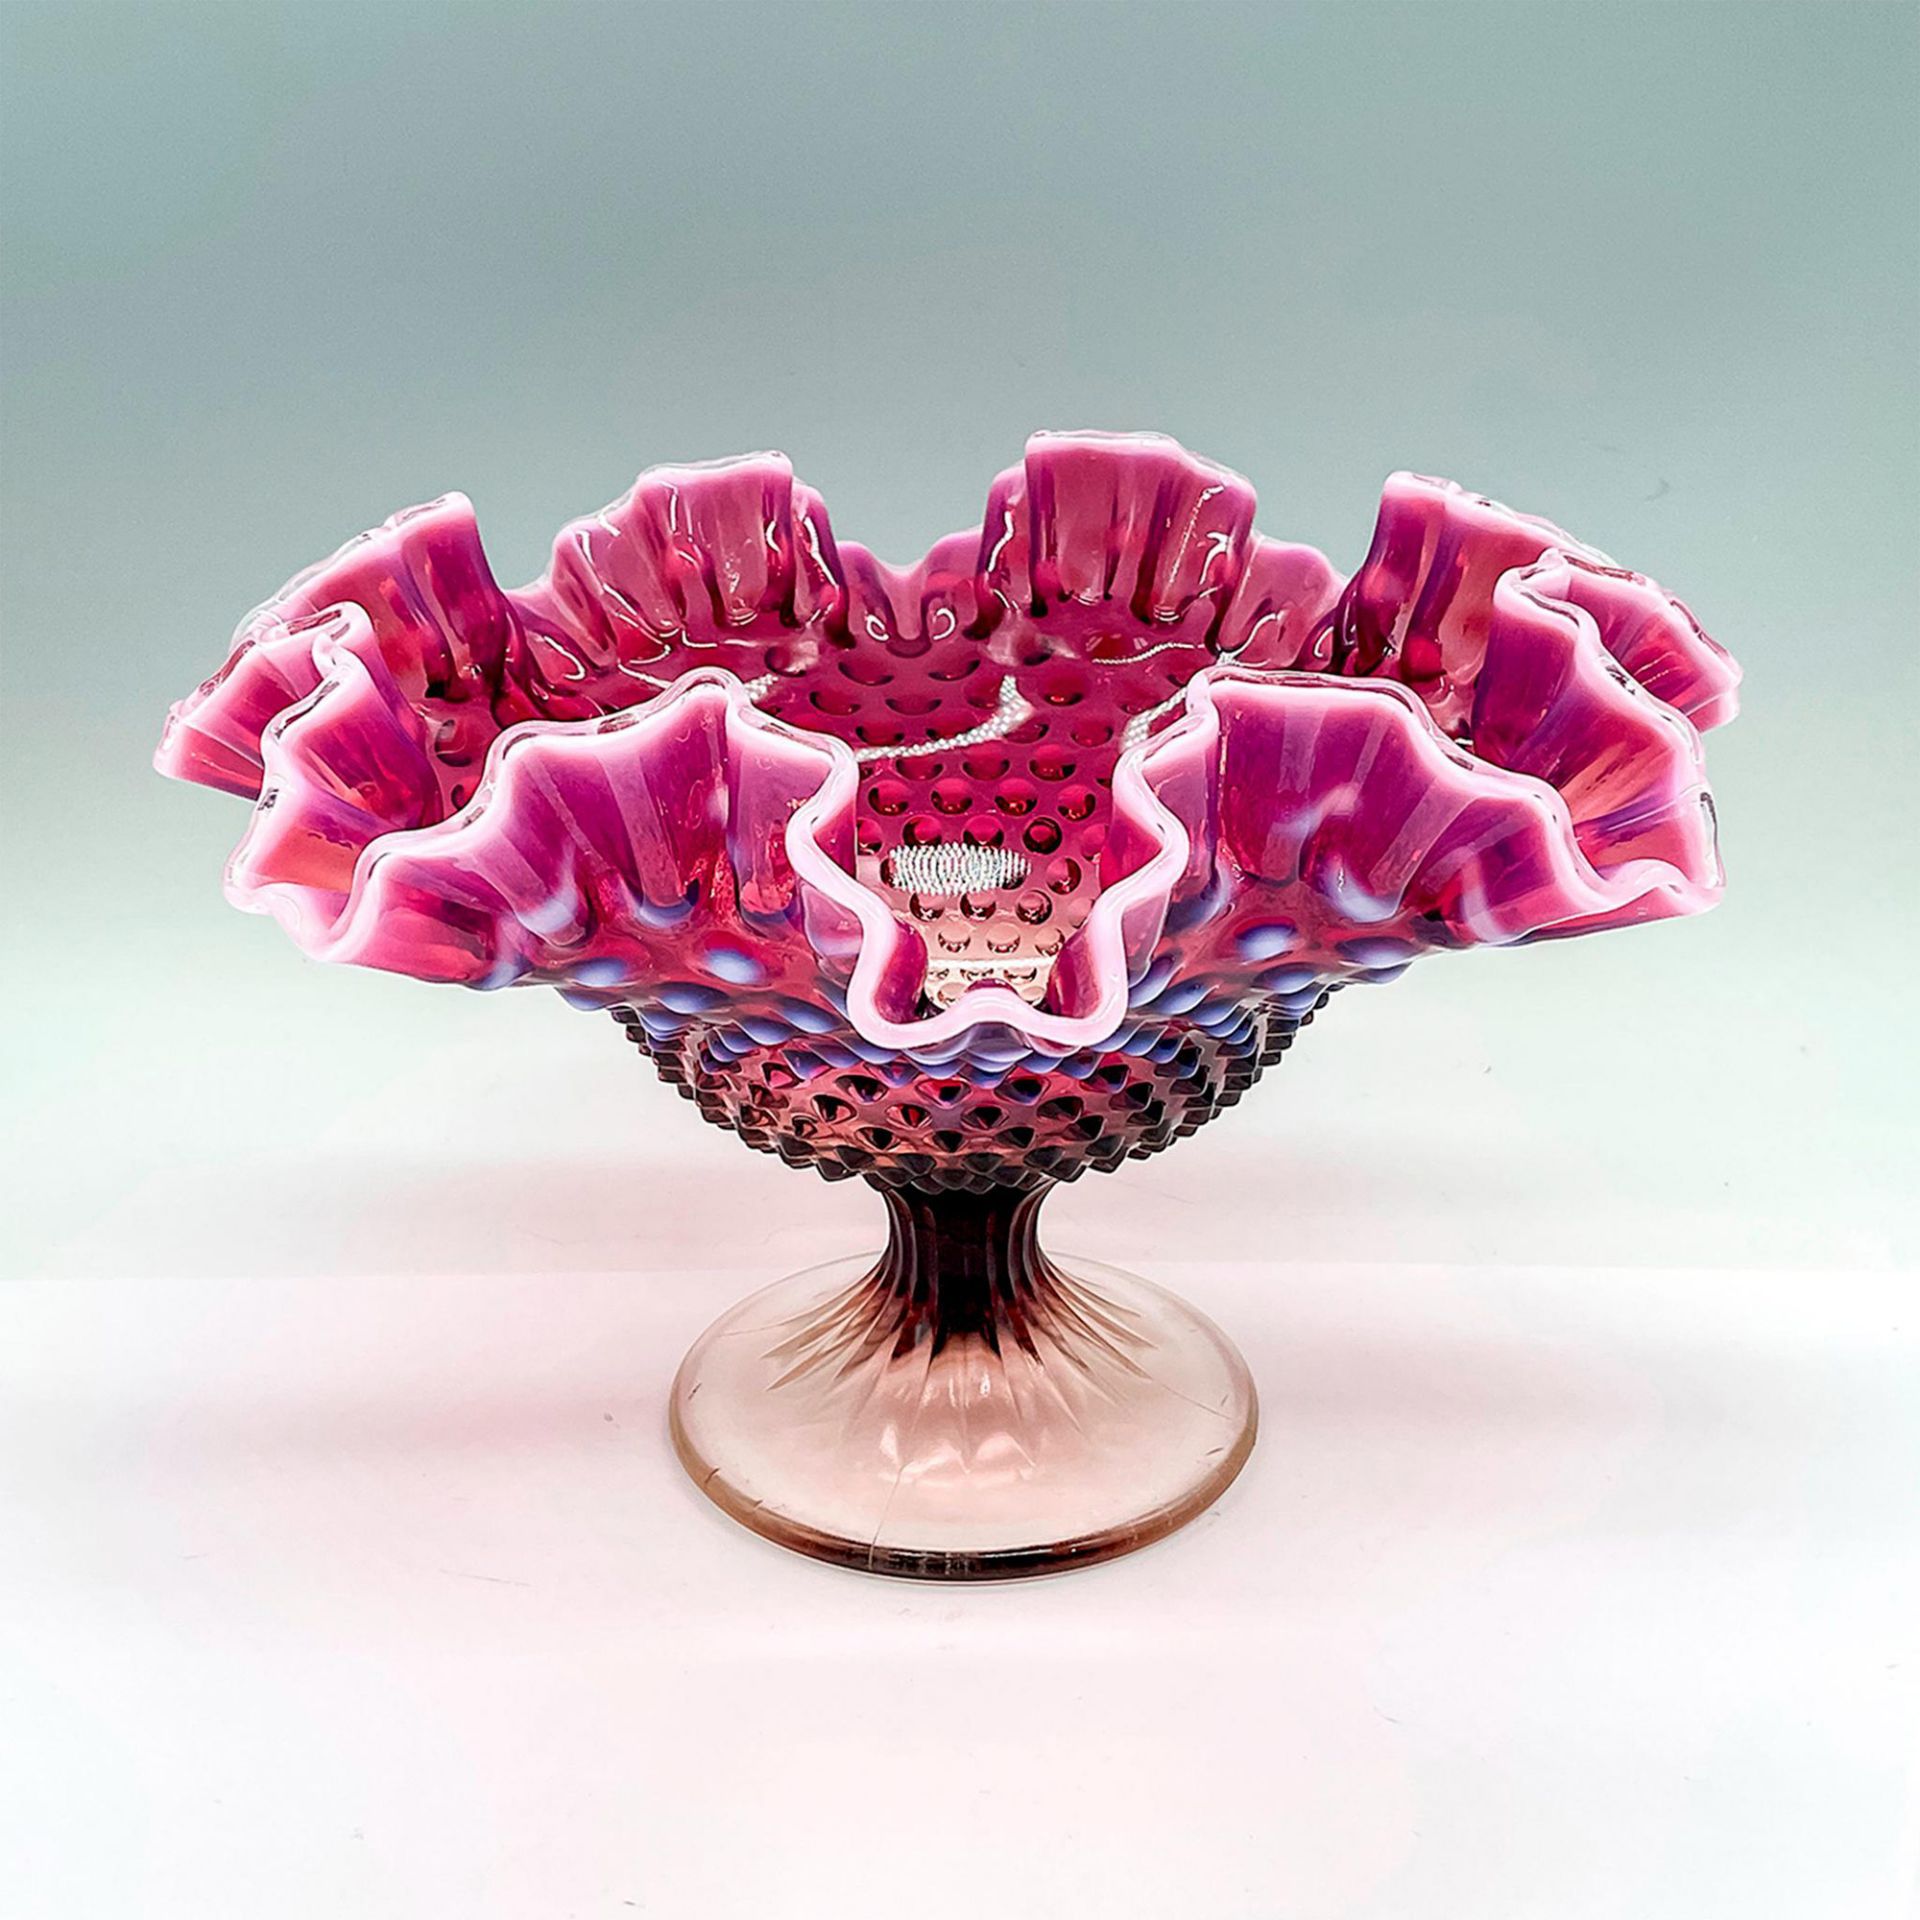 Fenton Glass Opalescent Footed Bowl, Hobnail Plum - Image 2 of 3